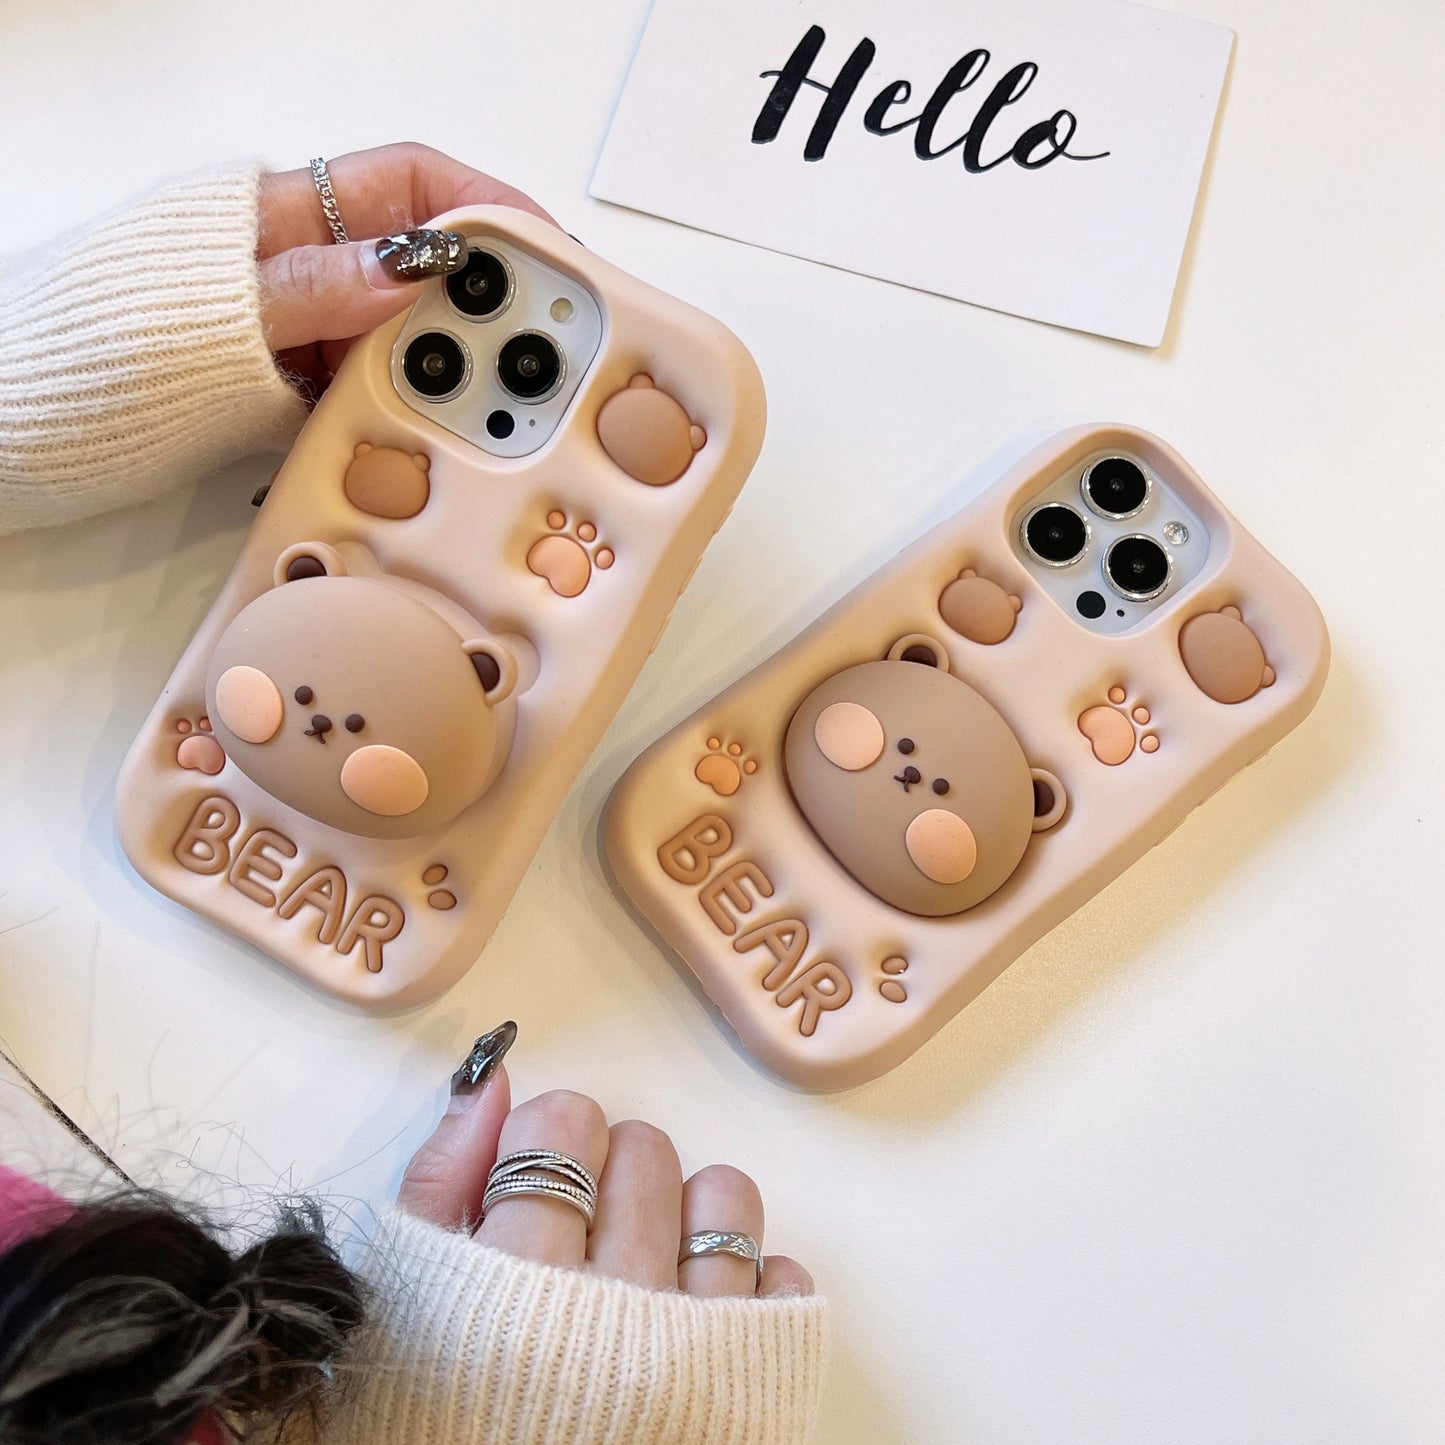 Cutie Bear Case with Holder